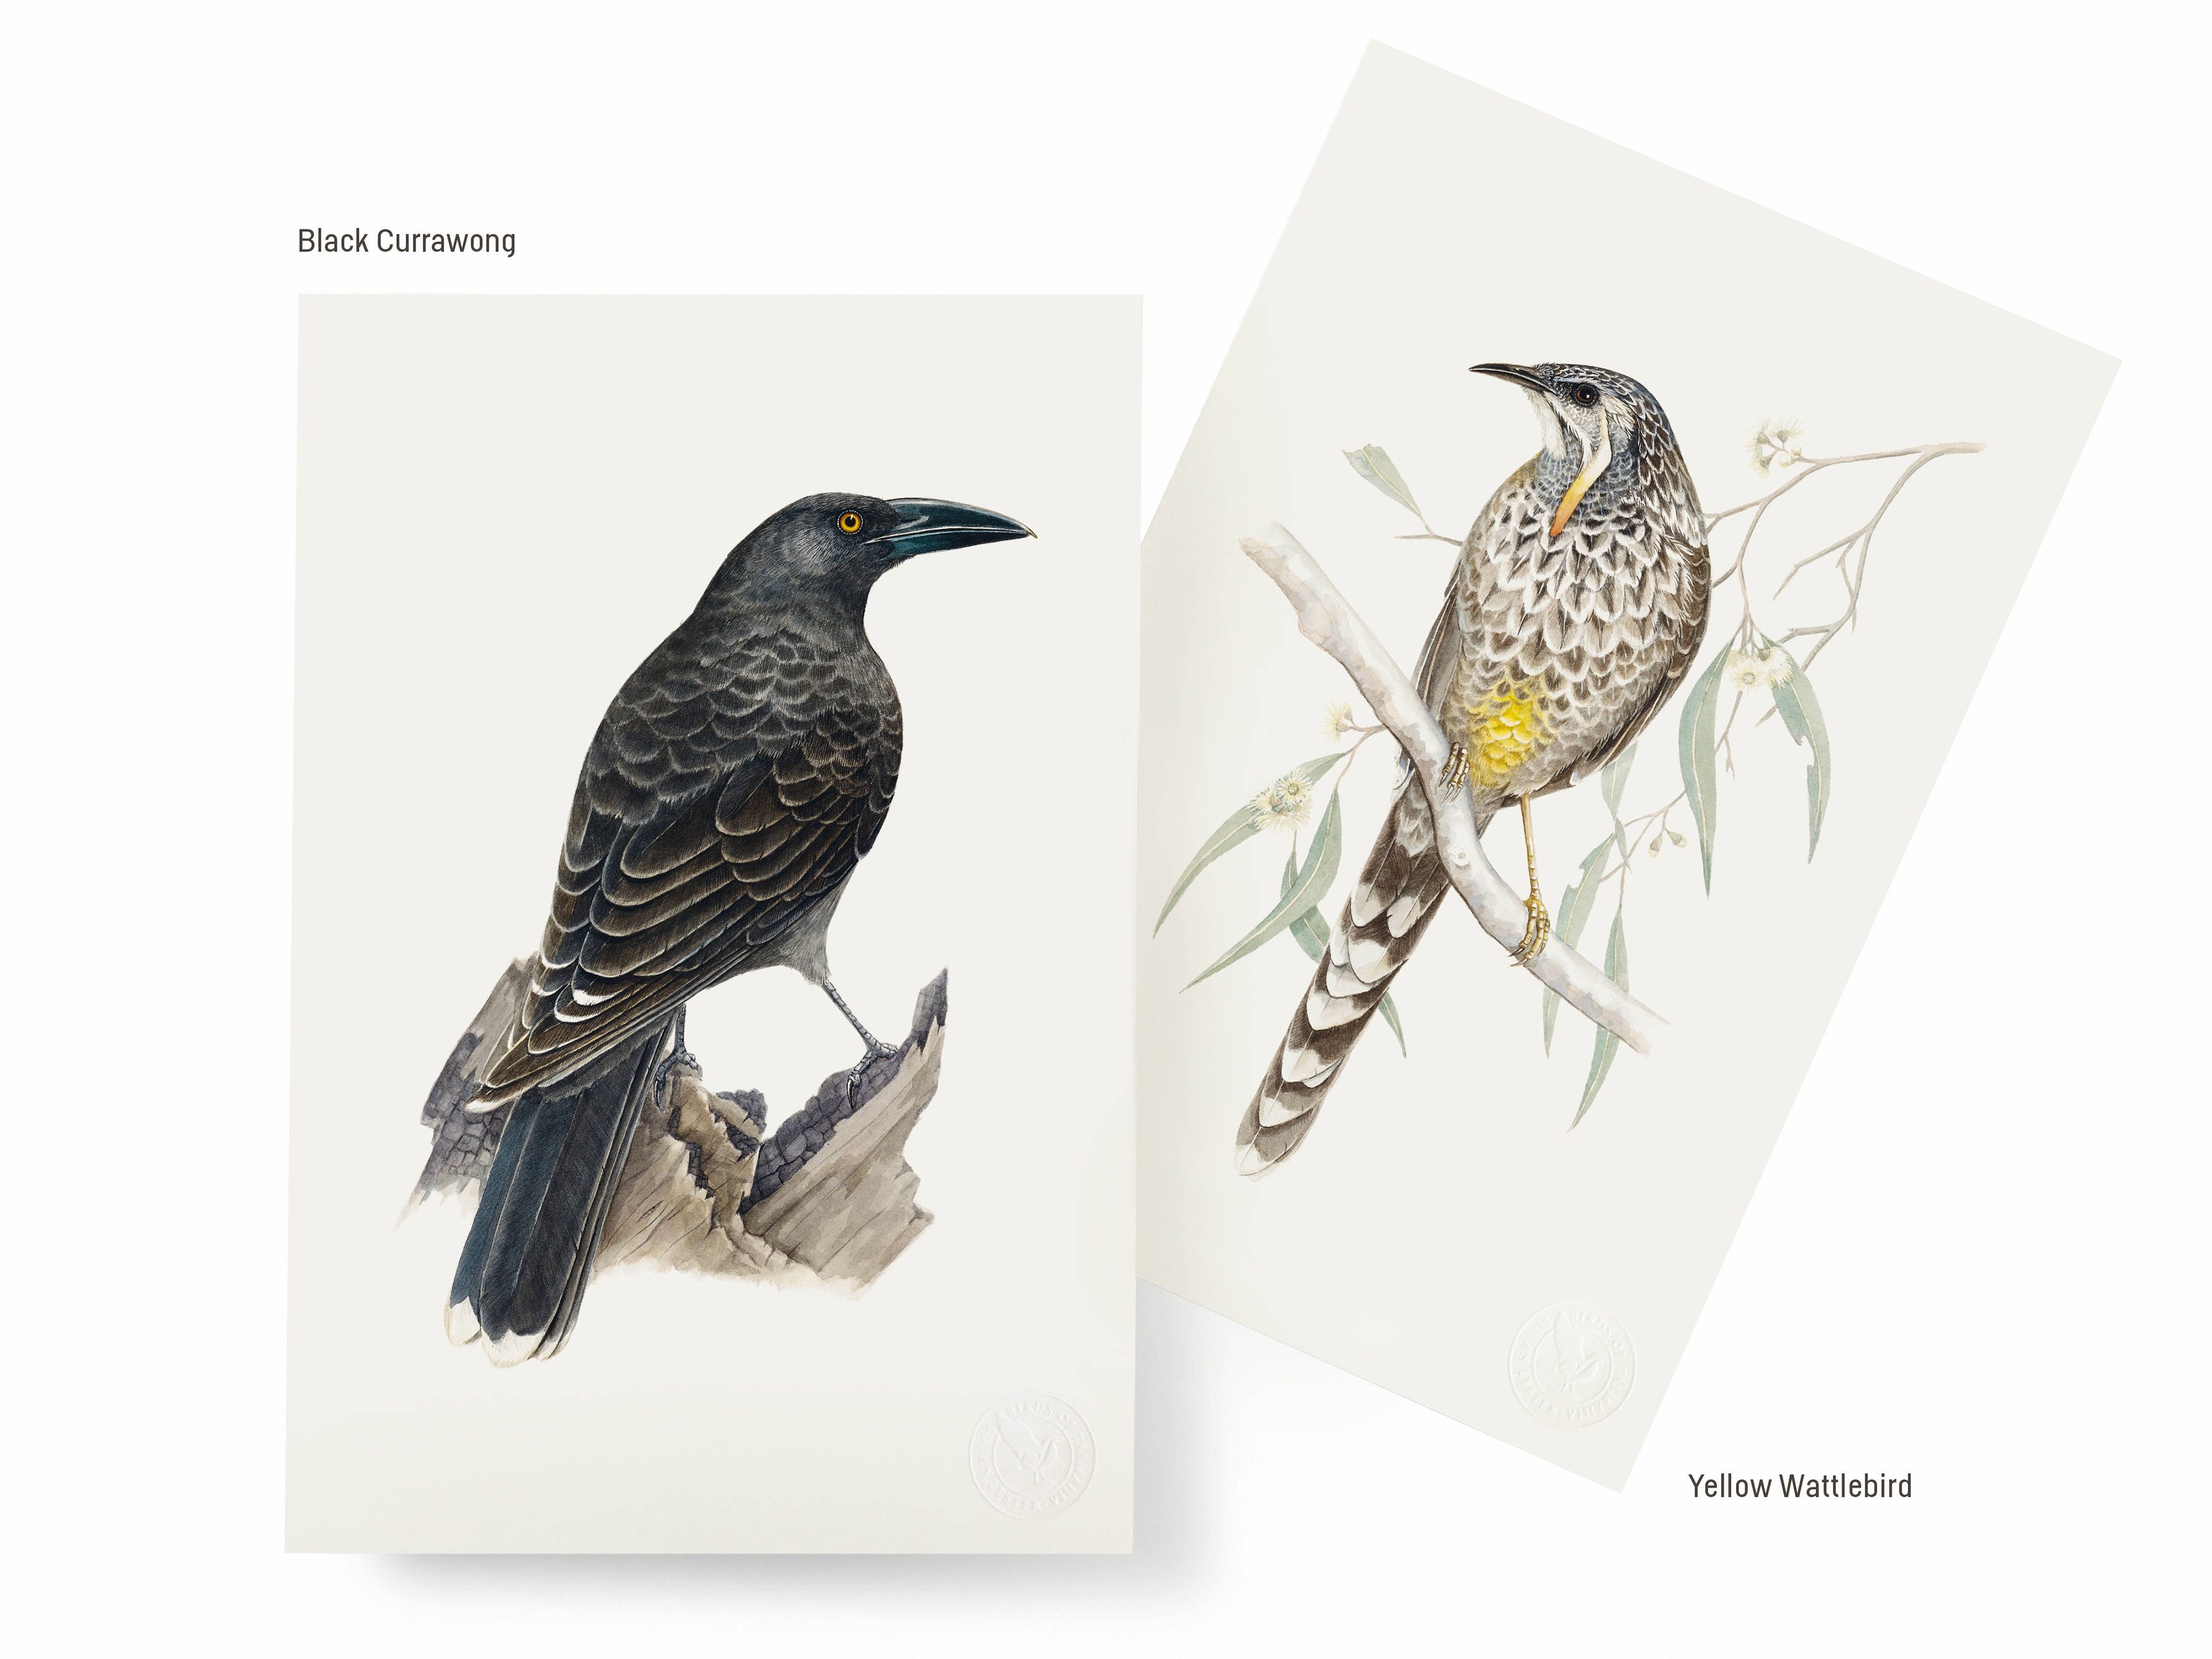 Two of the selection of six artworks available as part of the special BOXED edition: Black Currawong on the left, Yellow Wattlebird on the right.